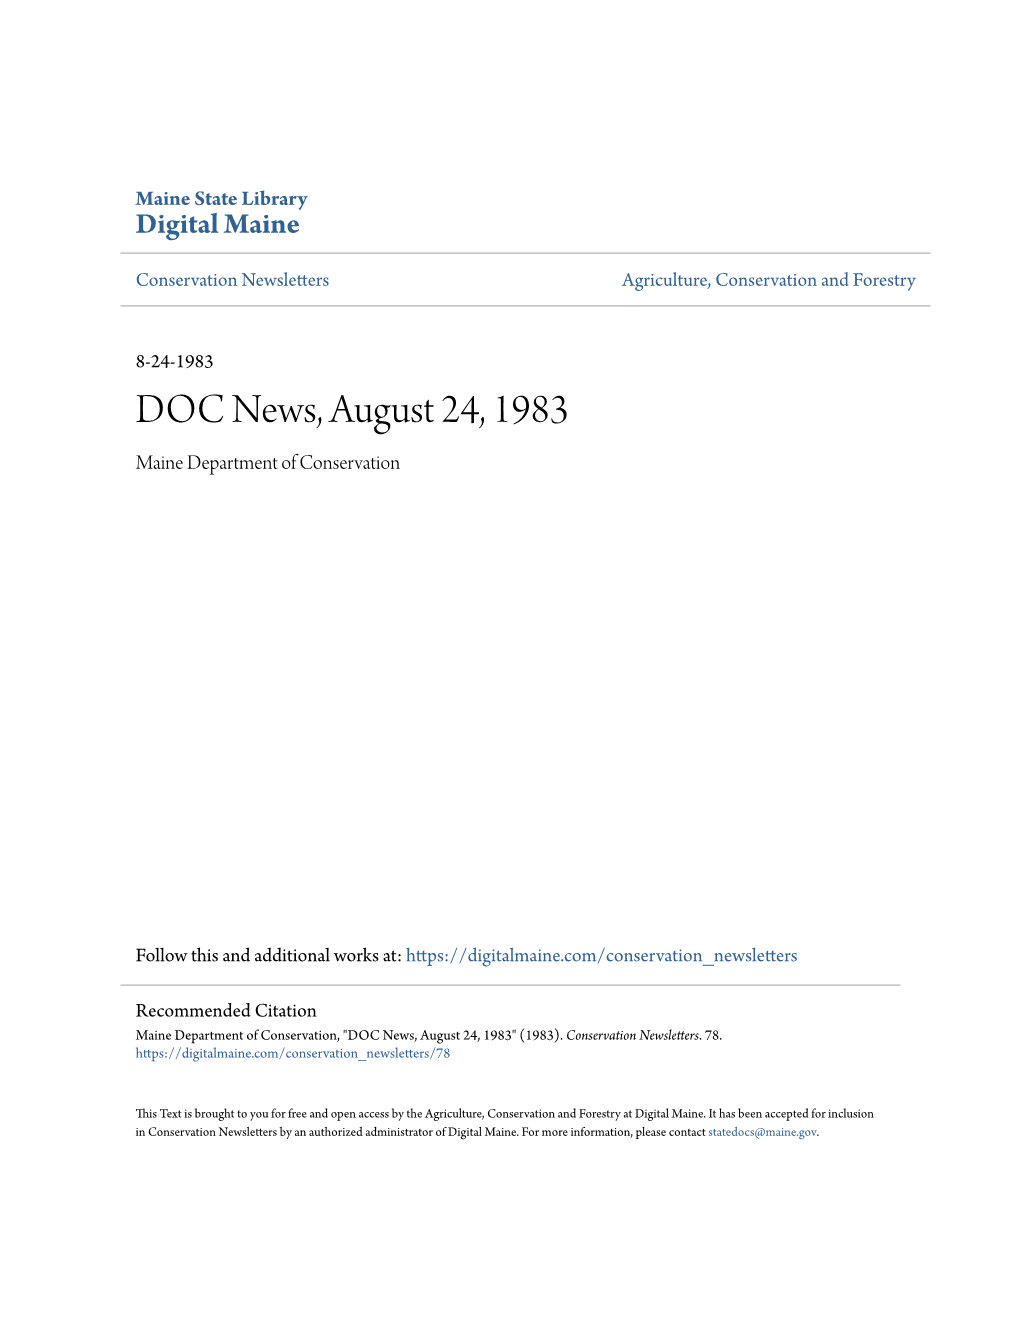 DOC News, August 24, 1983 Maine Department of Conservation